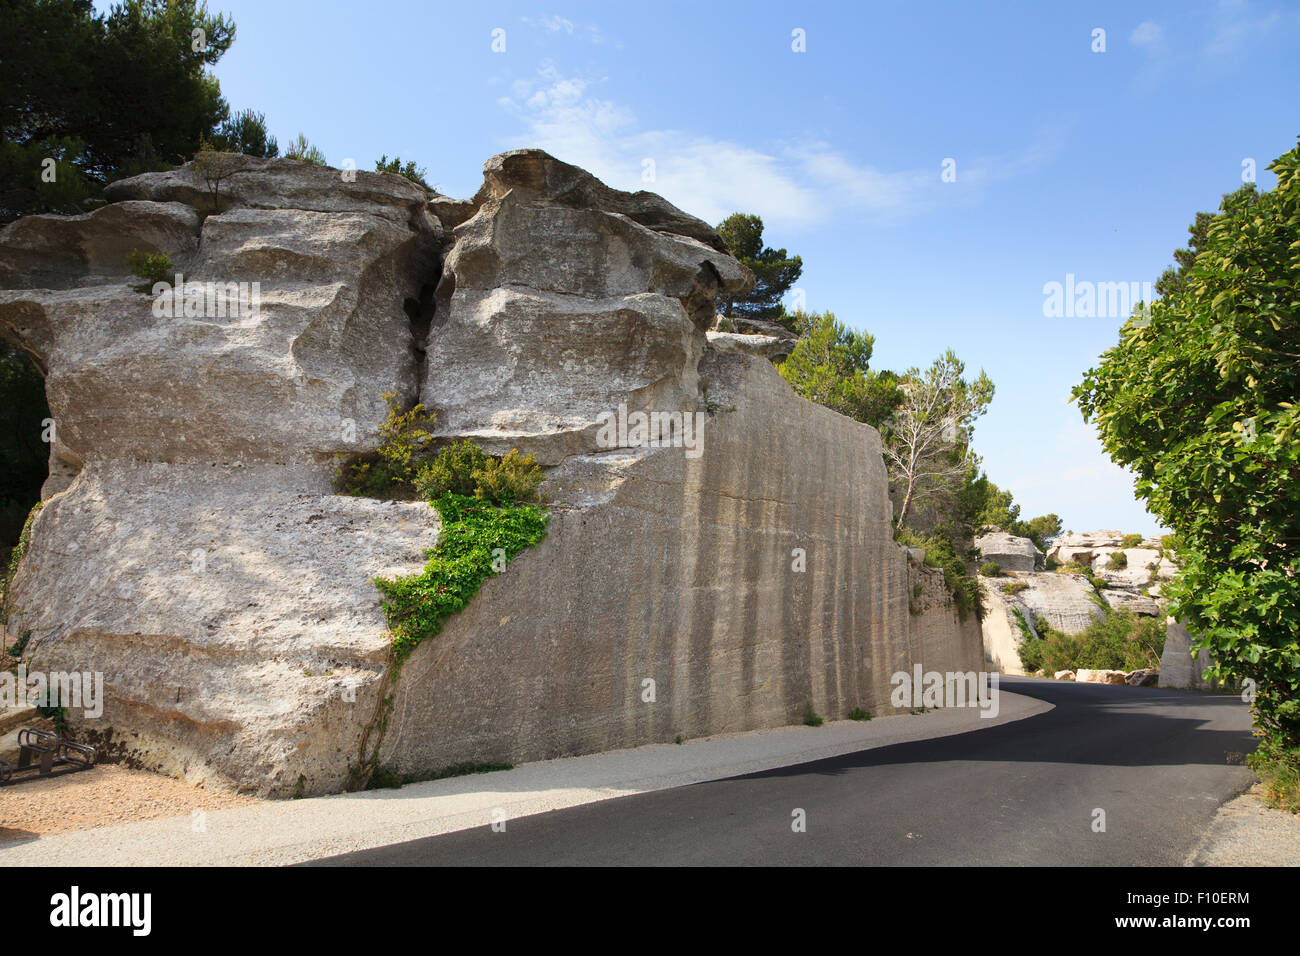 Road without cars cut through rocky hillside Stock Photo